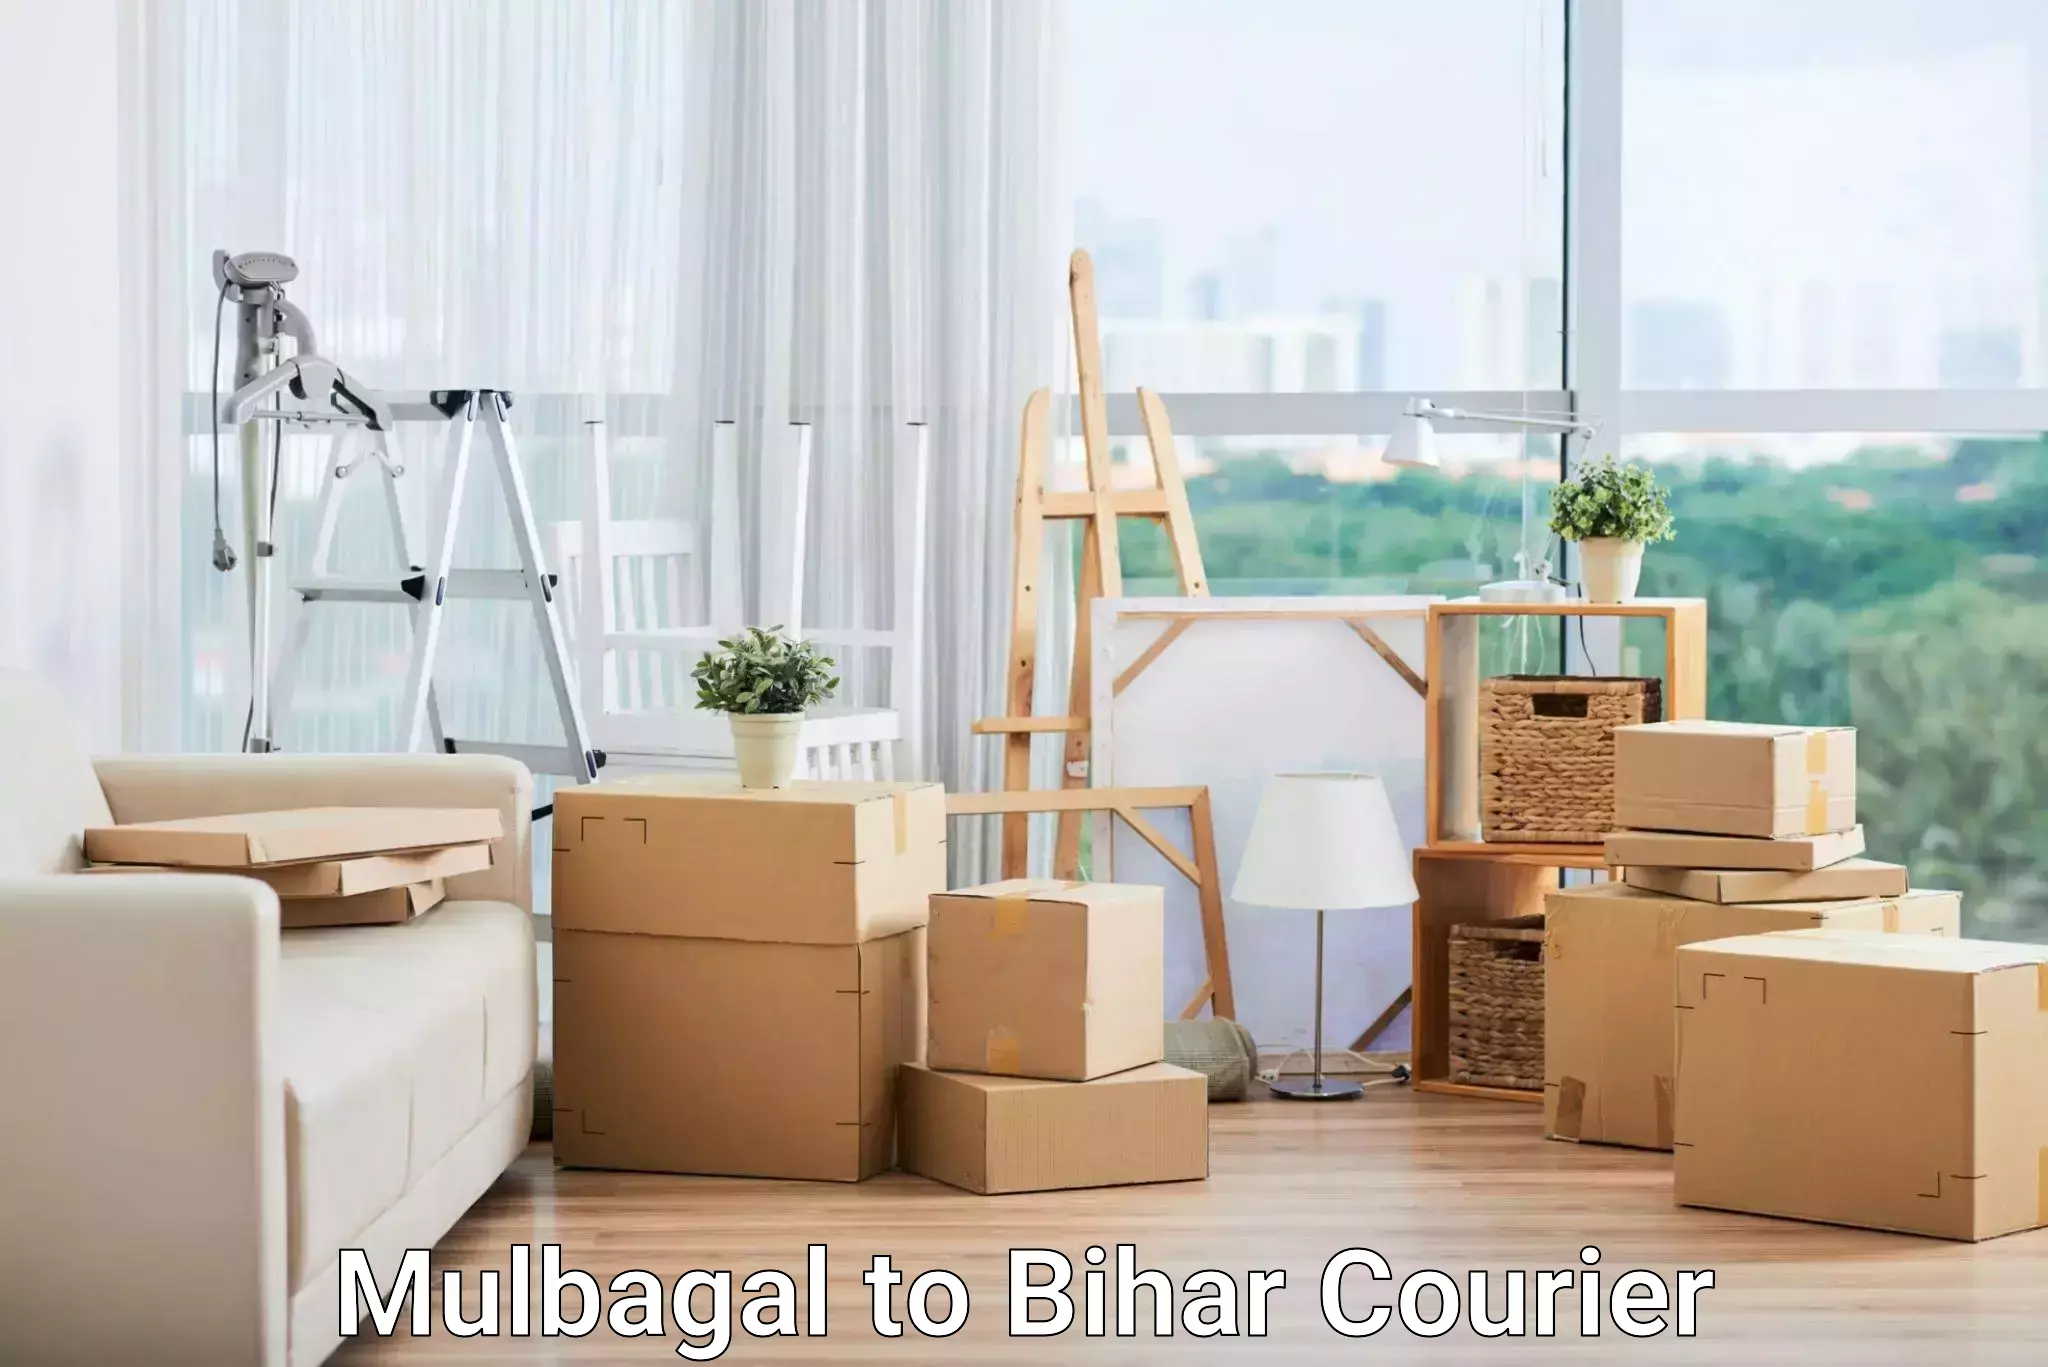 Multi-package shipping Mulbagal to Mahnar Bazar